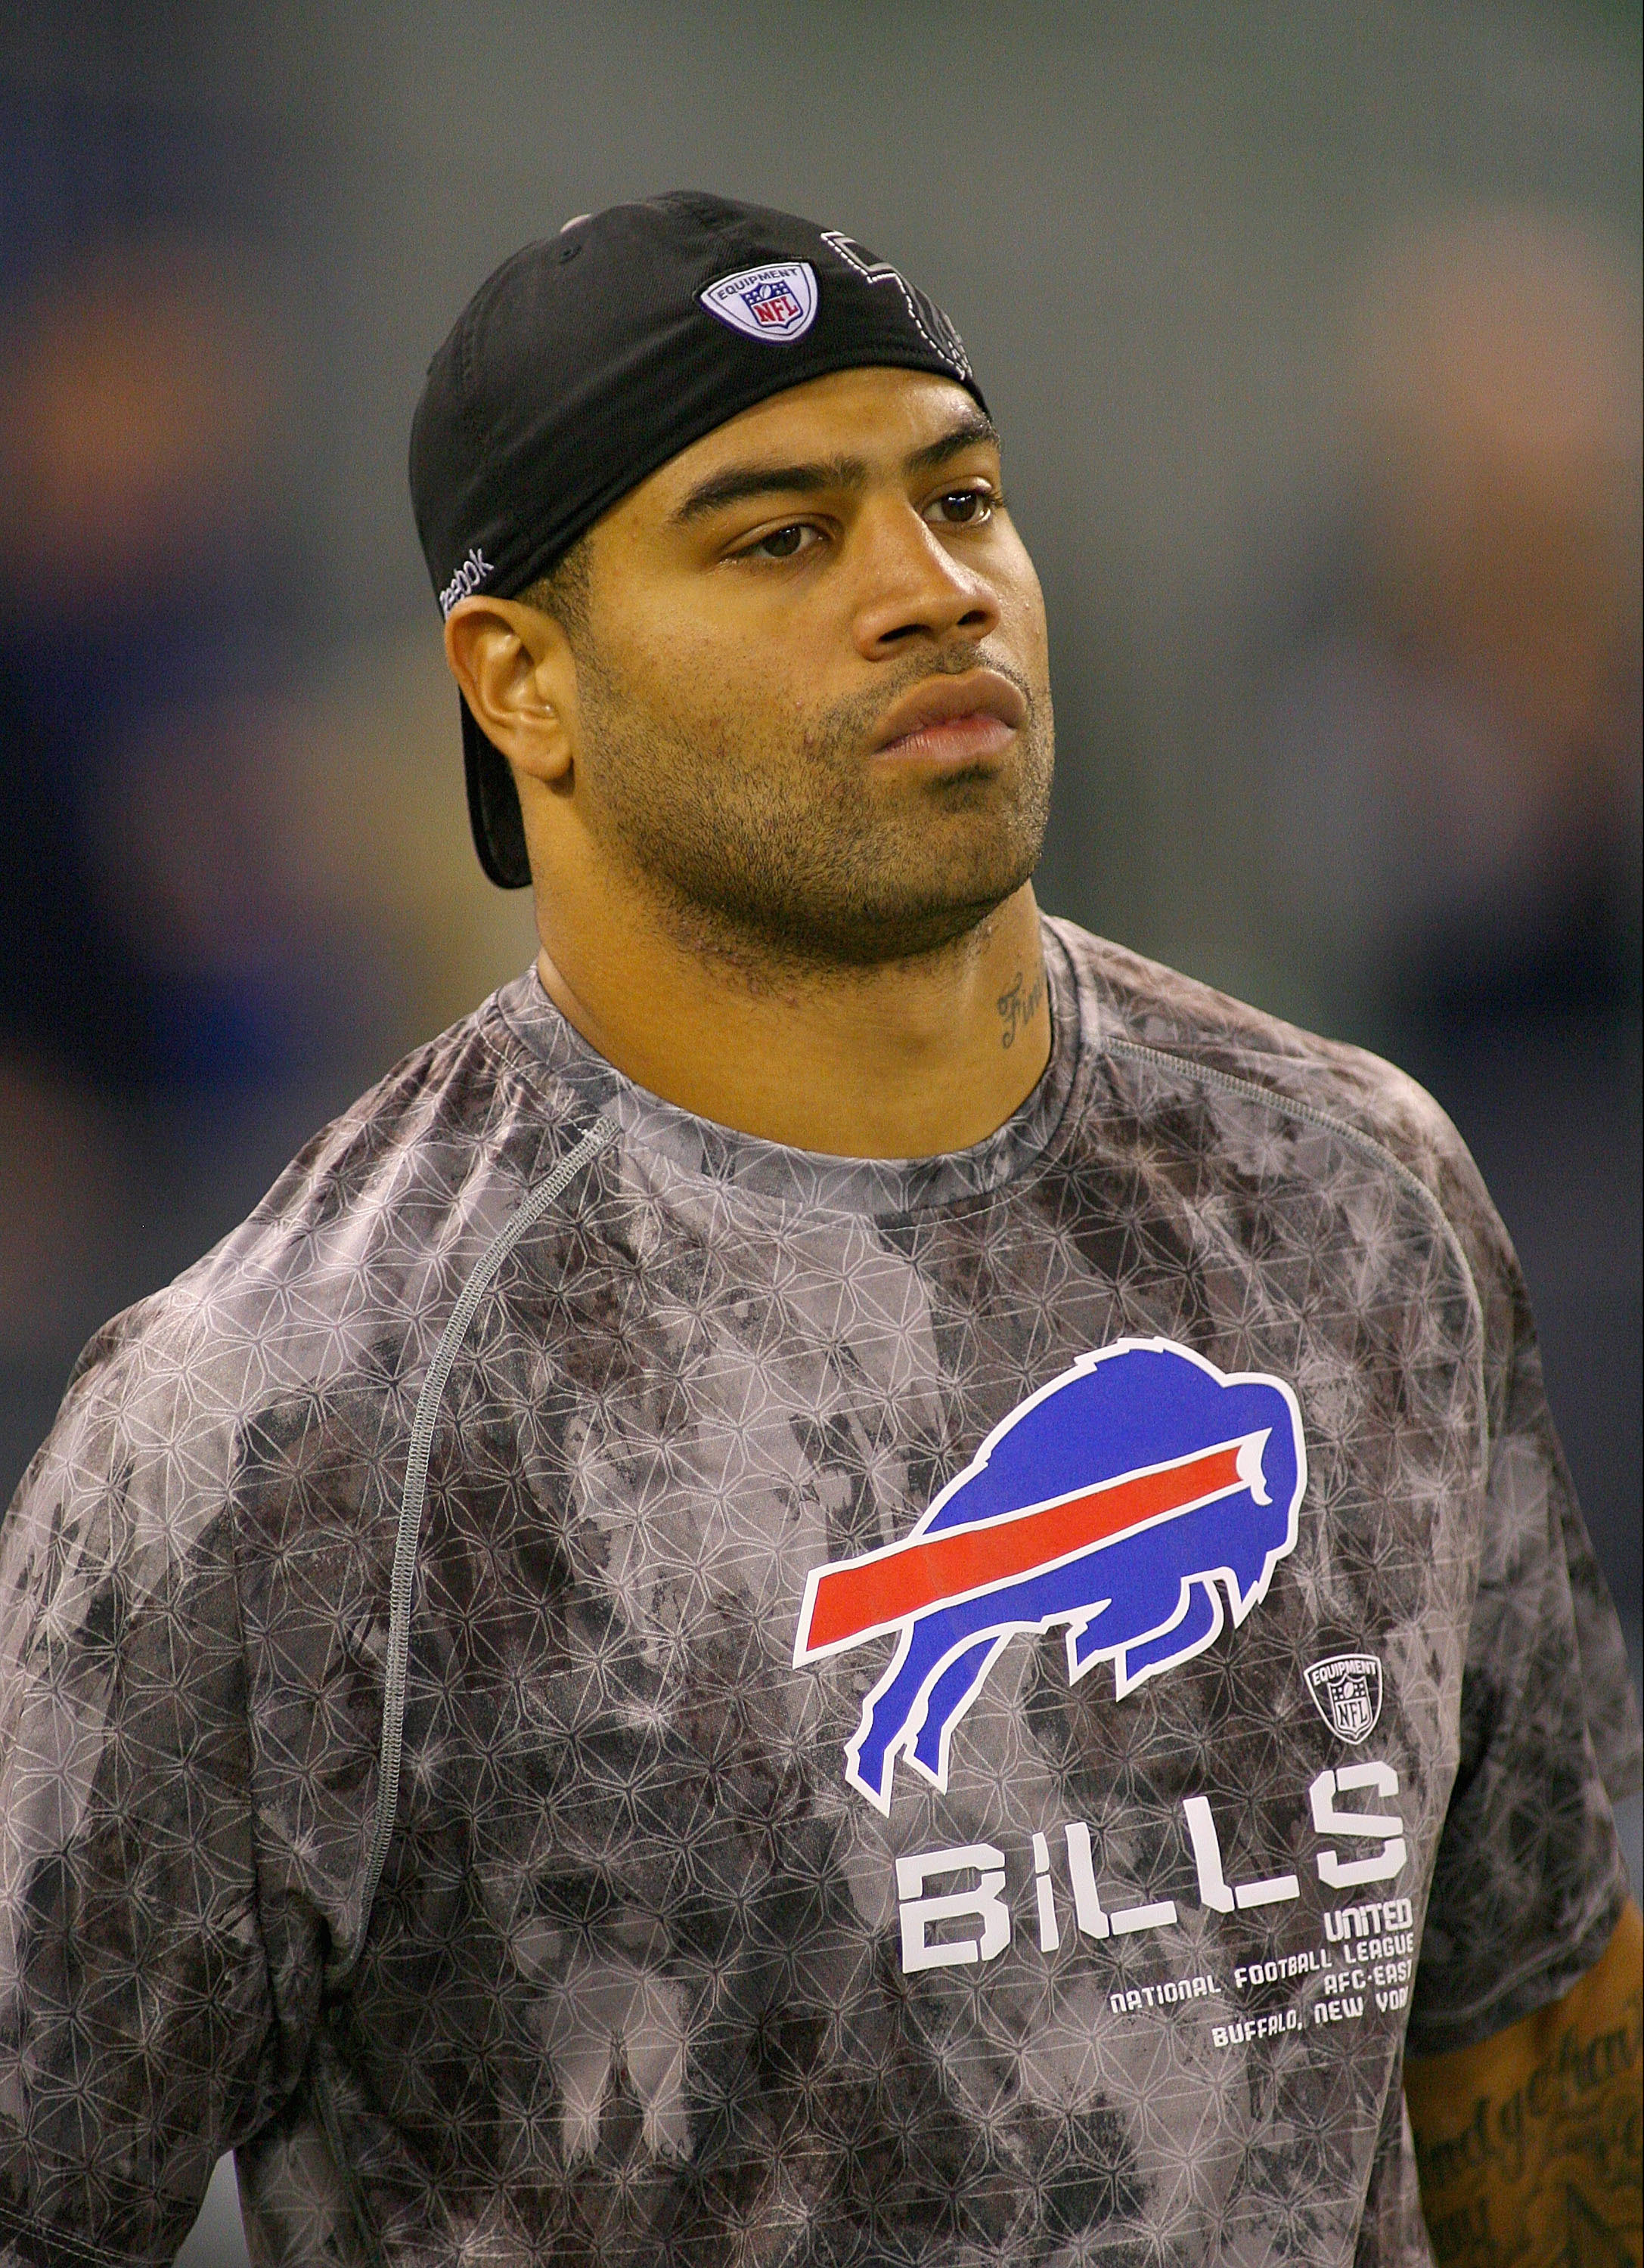 TORONTO, ON - NOVEMBER 07: Shawne Merriman #55 of the Buffalo Bills stands on the field during warmups prior to play against the Chicago Bears at Rogers Centre on November 7, 2010 in Toronto, Canada. Chicago won 22-19. (Photo by Rick Stewart/Getty Images)